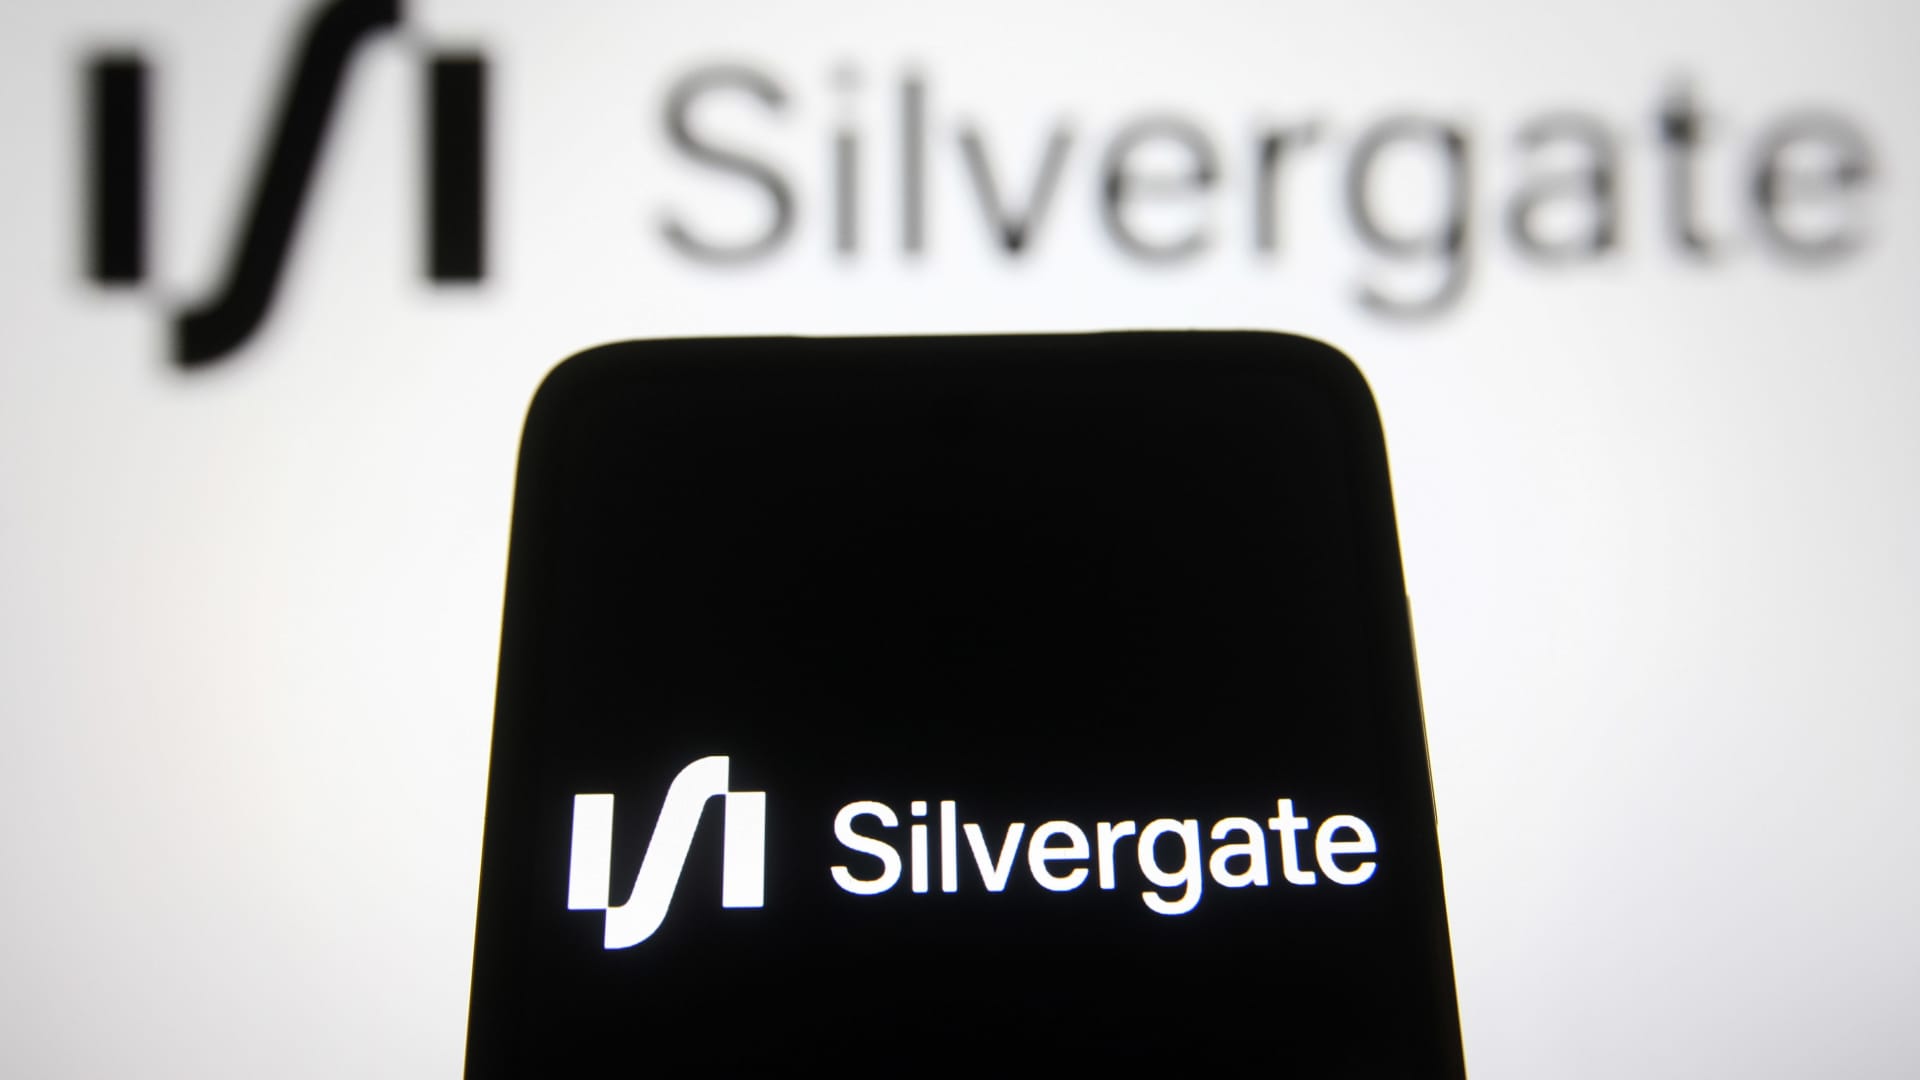 Silvergate Capital tanks nearly 40% after crypto bank discloses massive fourth-quarter withdrawals